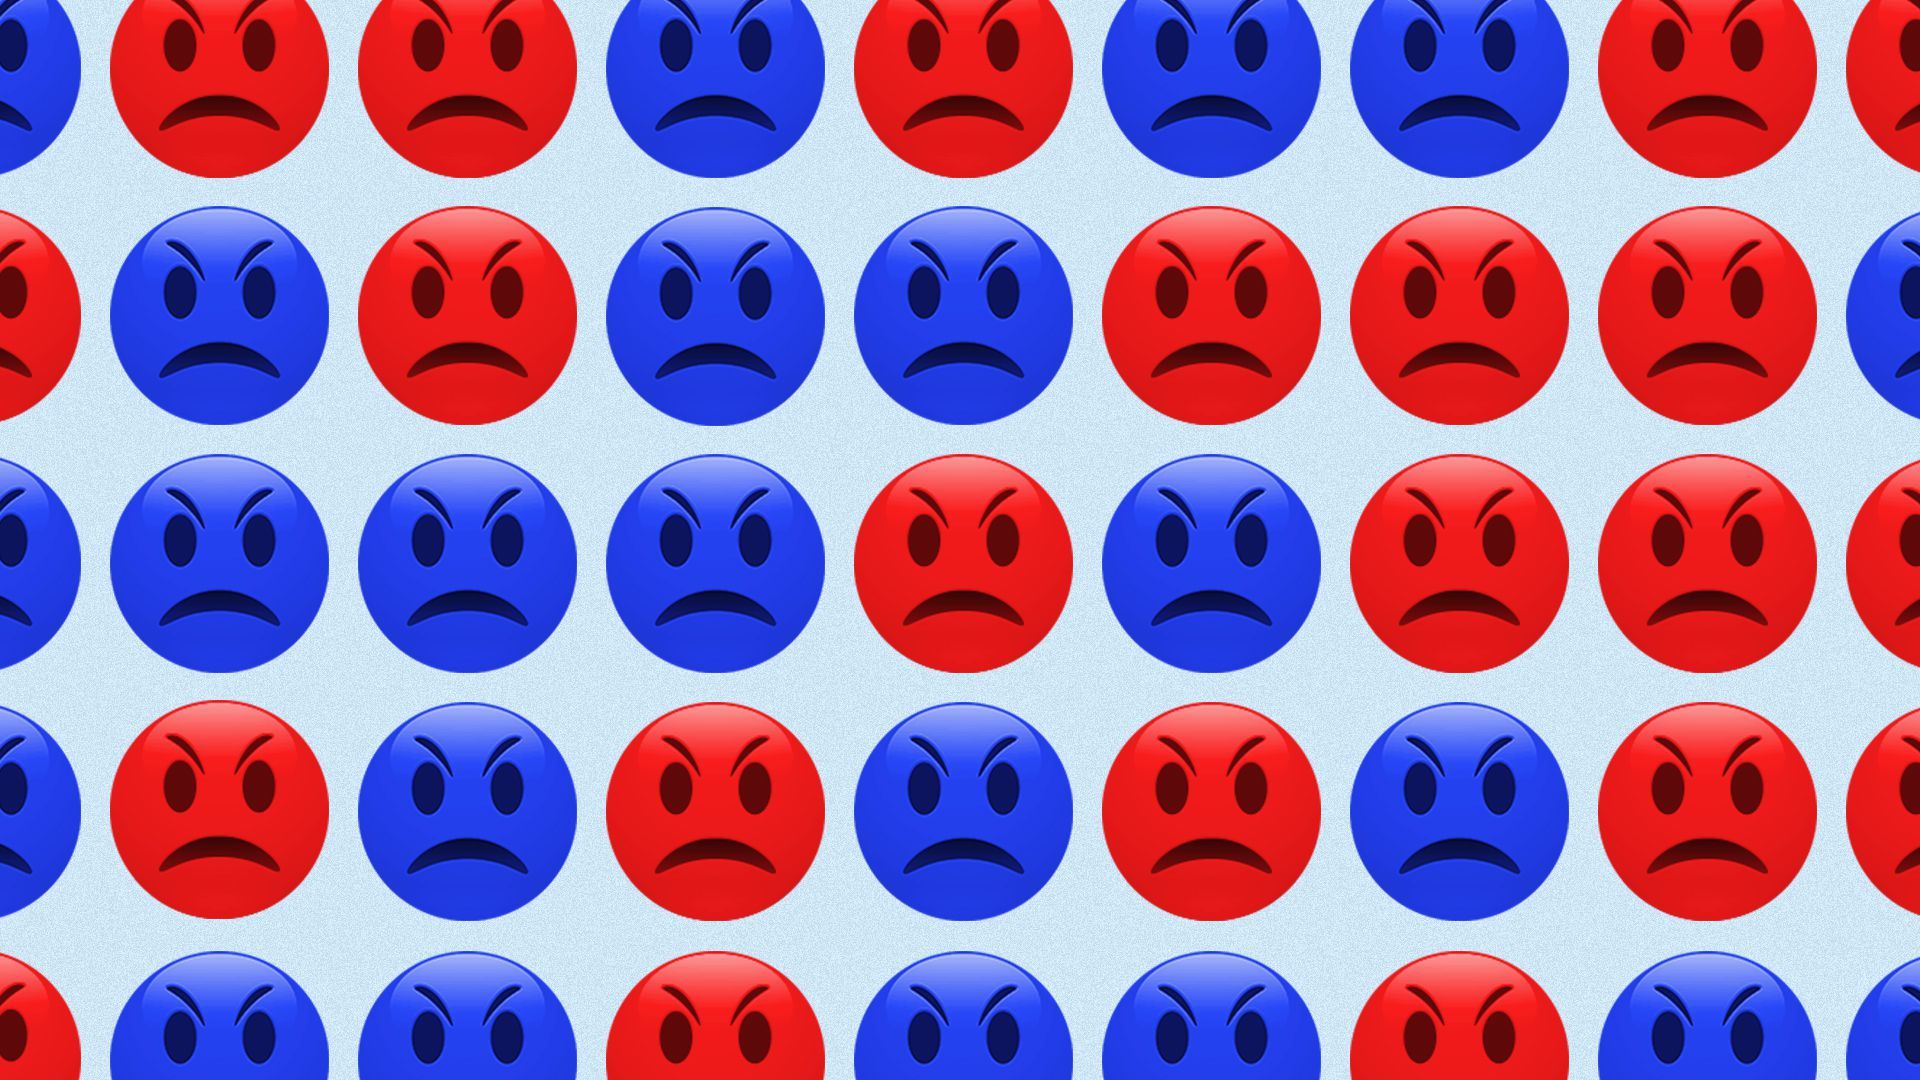 Illustration of a pattern of red and blue angry emoji.